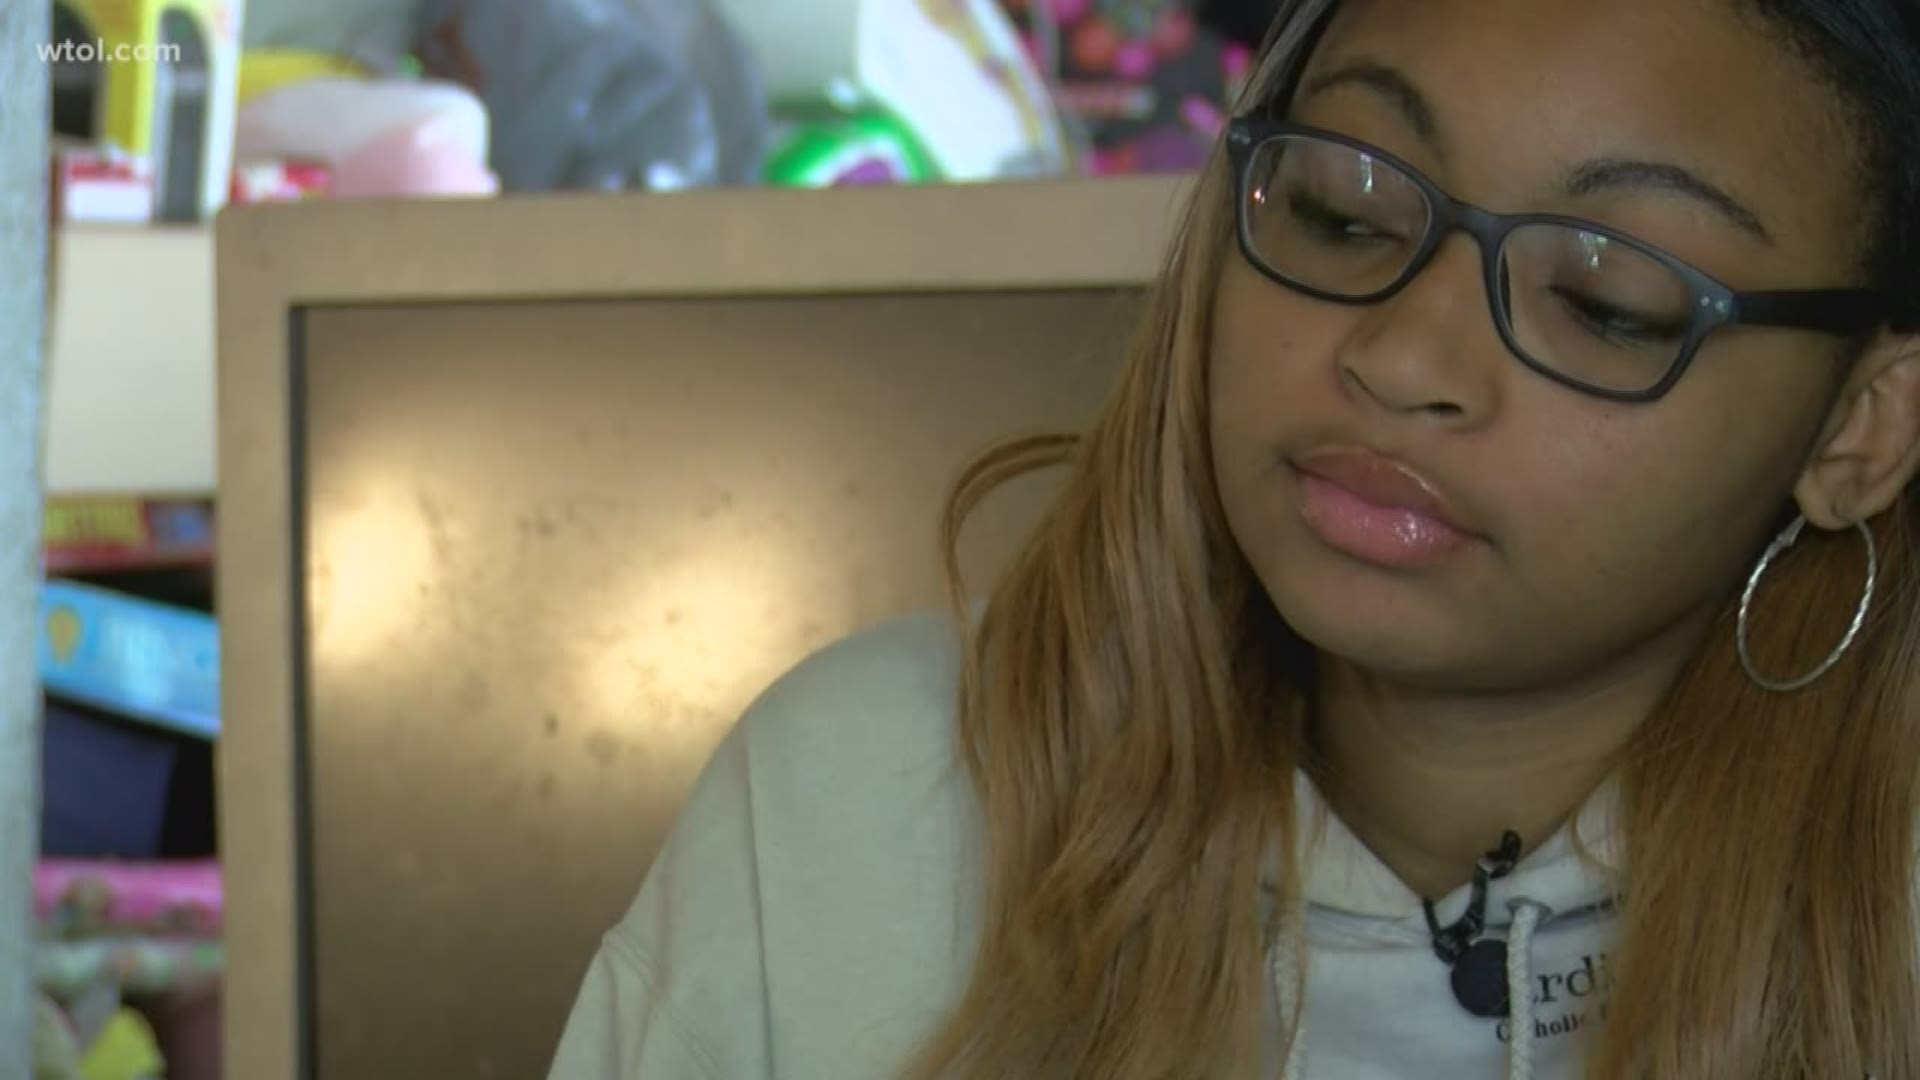 18-year-old Maria Pattin's father fell ill a few months ago, causing financial stress to her family. Tuition payments would be difficult, but after WTOL stepped in, her high school is still allowing her to walk during its graduation ceremony.